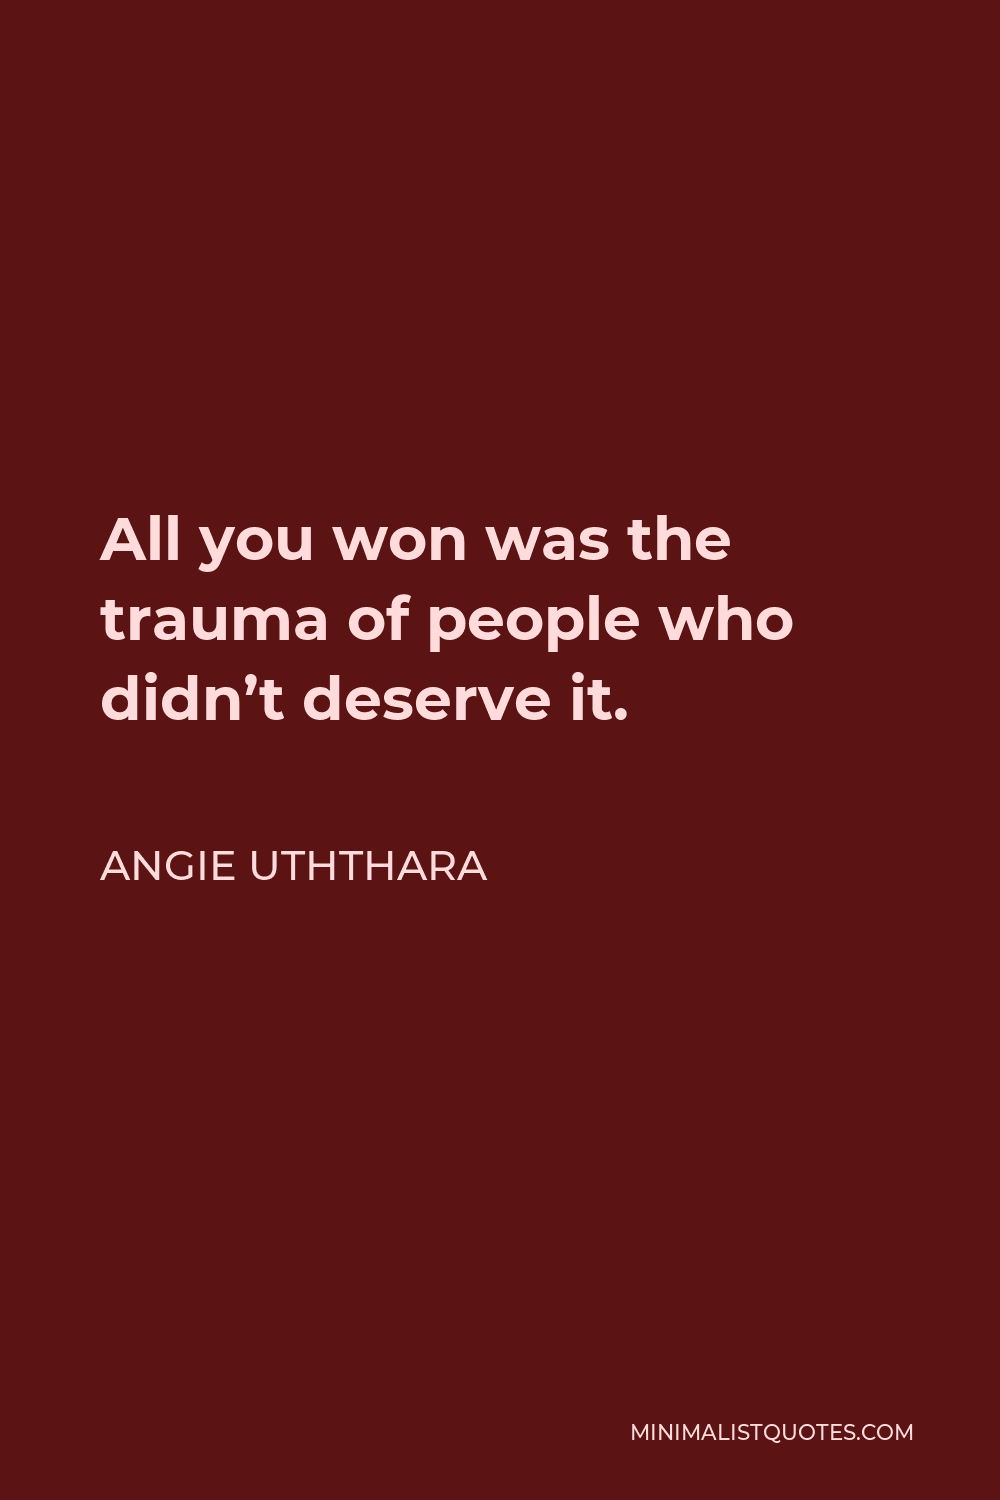 Angie Uththara Quote - All you won was the trauma of people who didn’t deserve it.